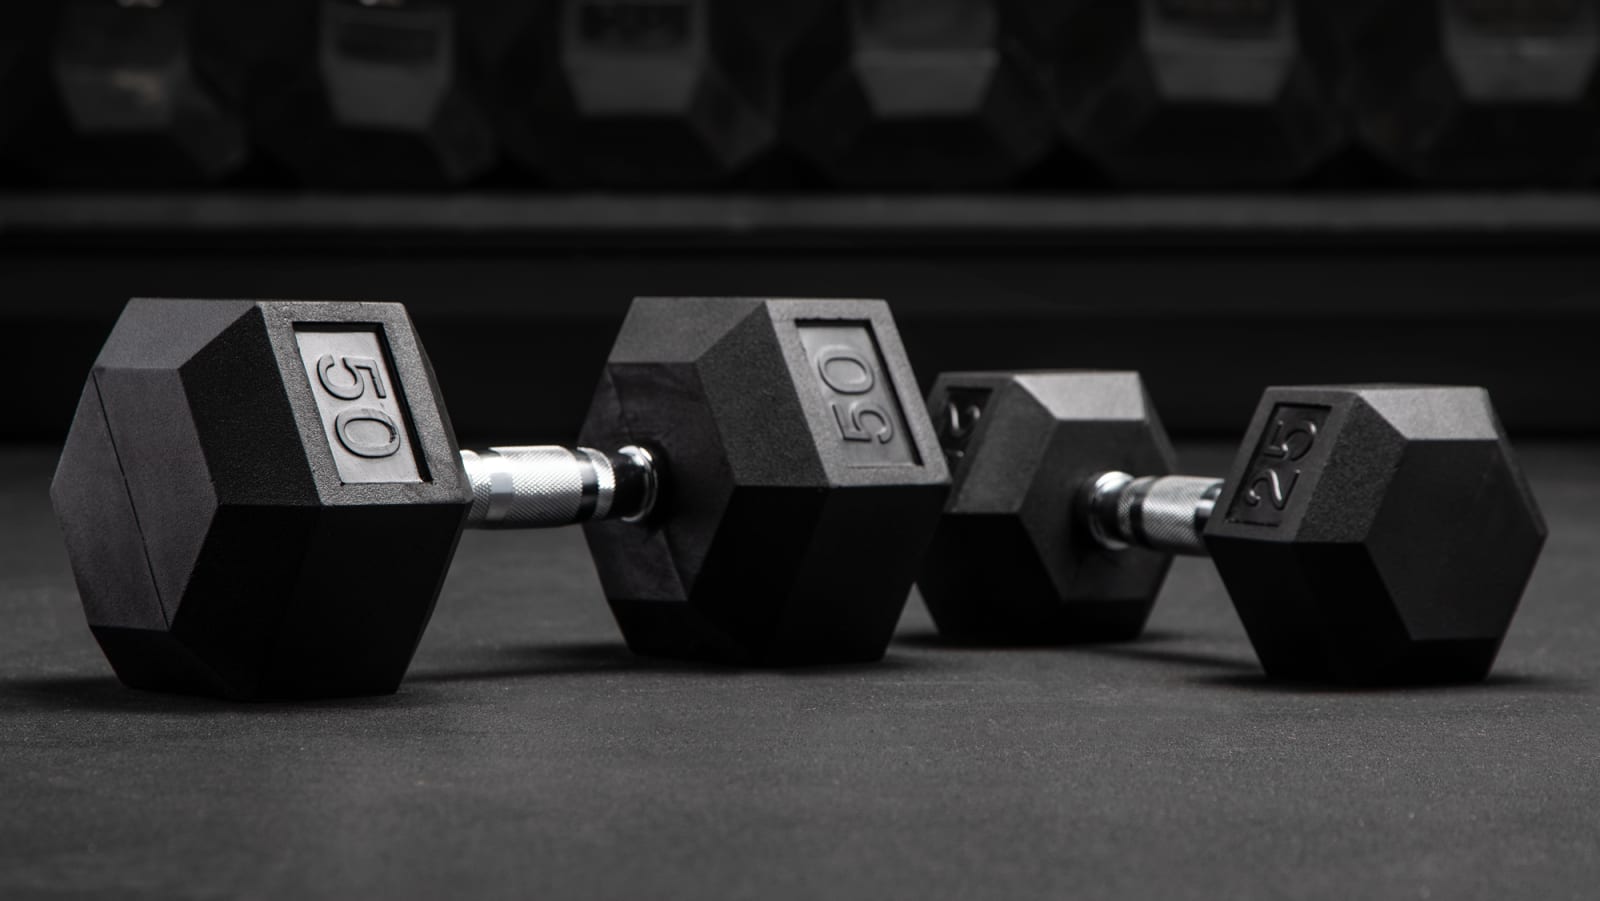 Brand New Free Shipping-Stength Rogue Fitness Rubber Hex Dumbbells 50lbs Pair 